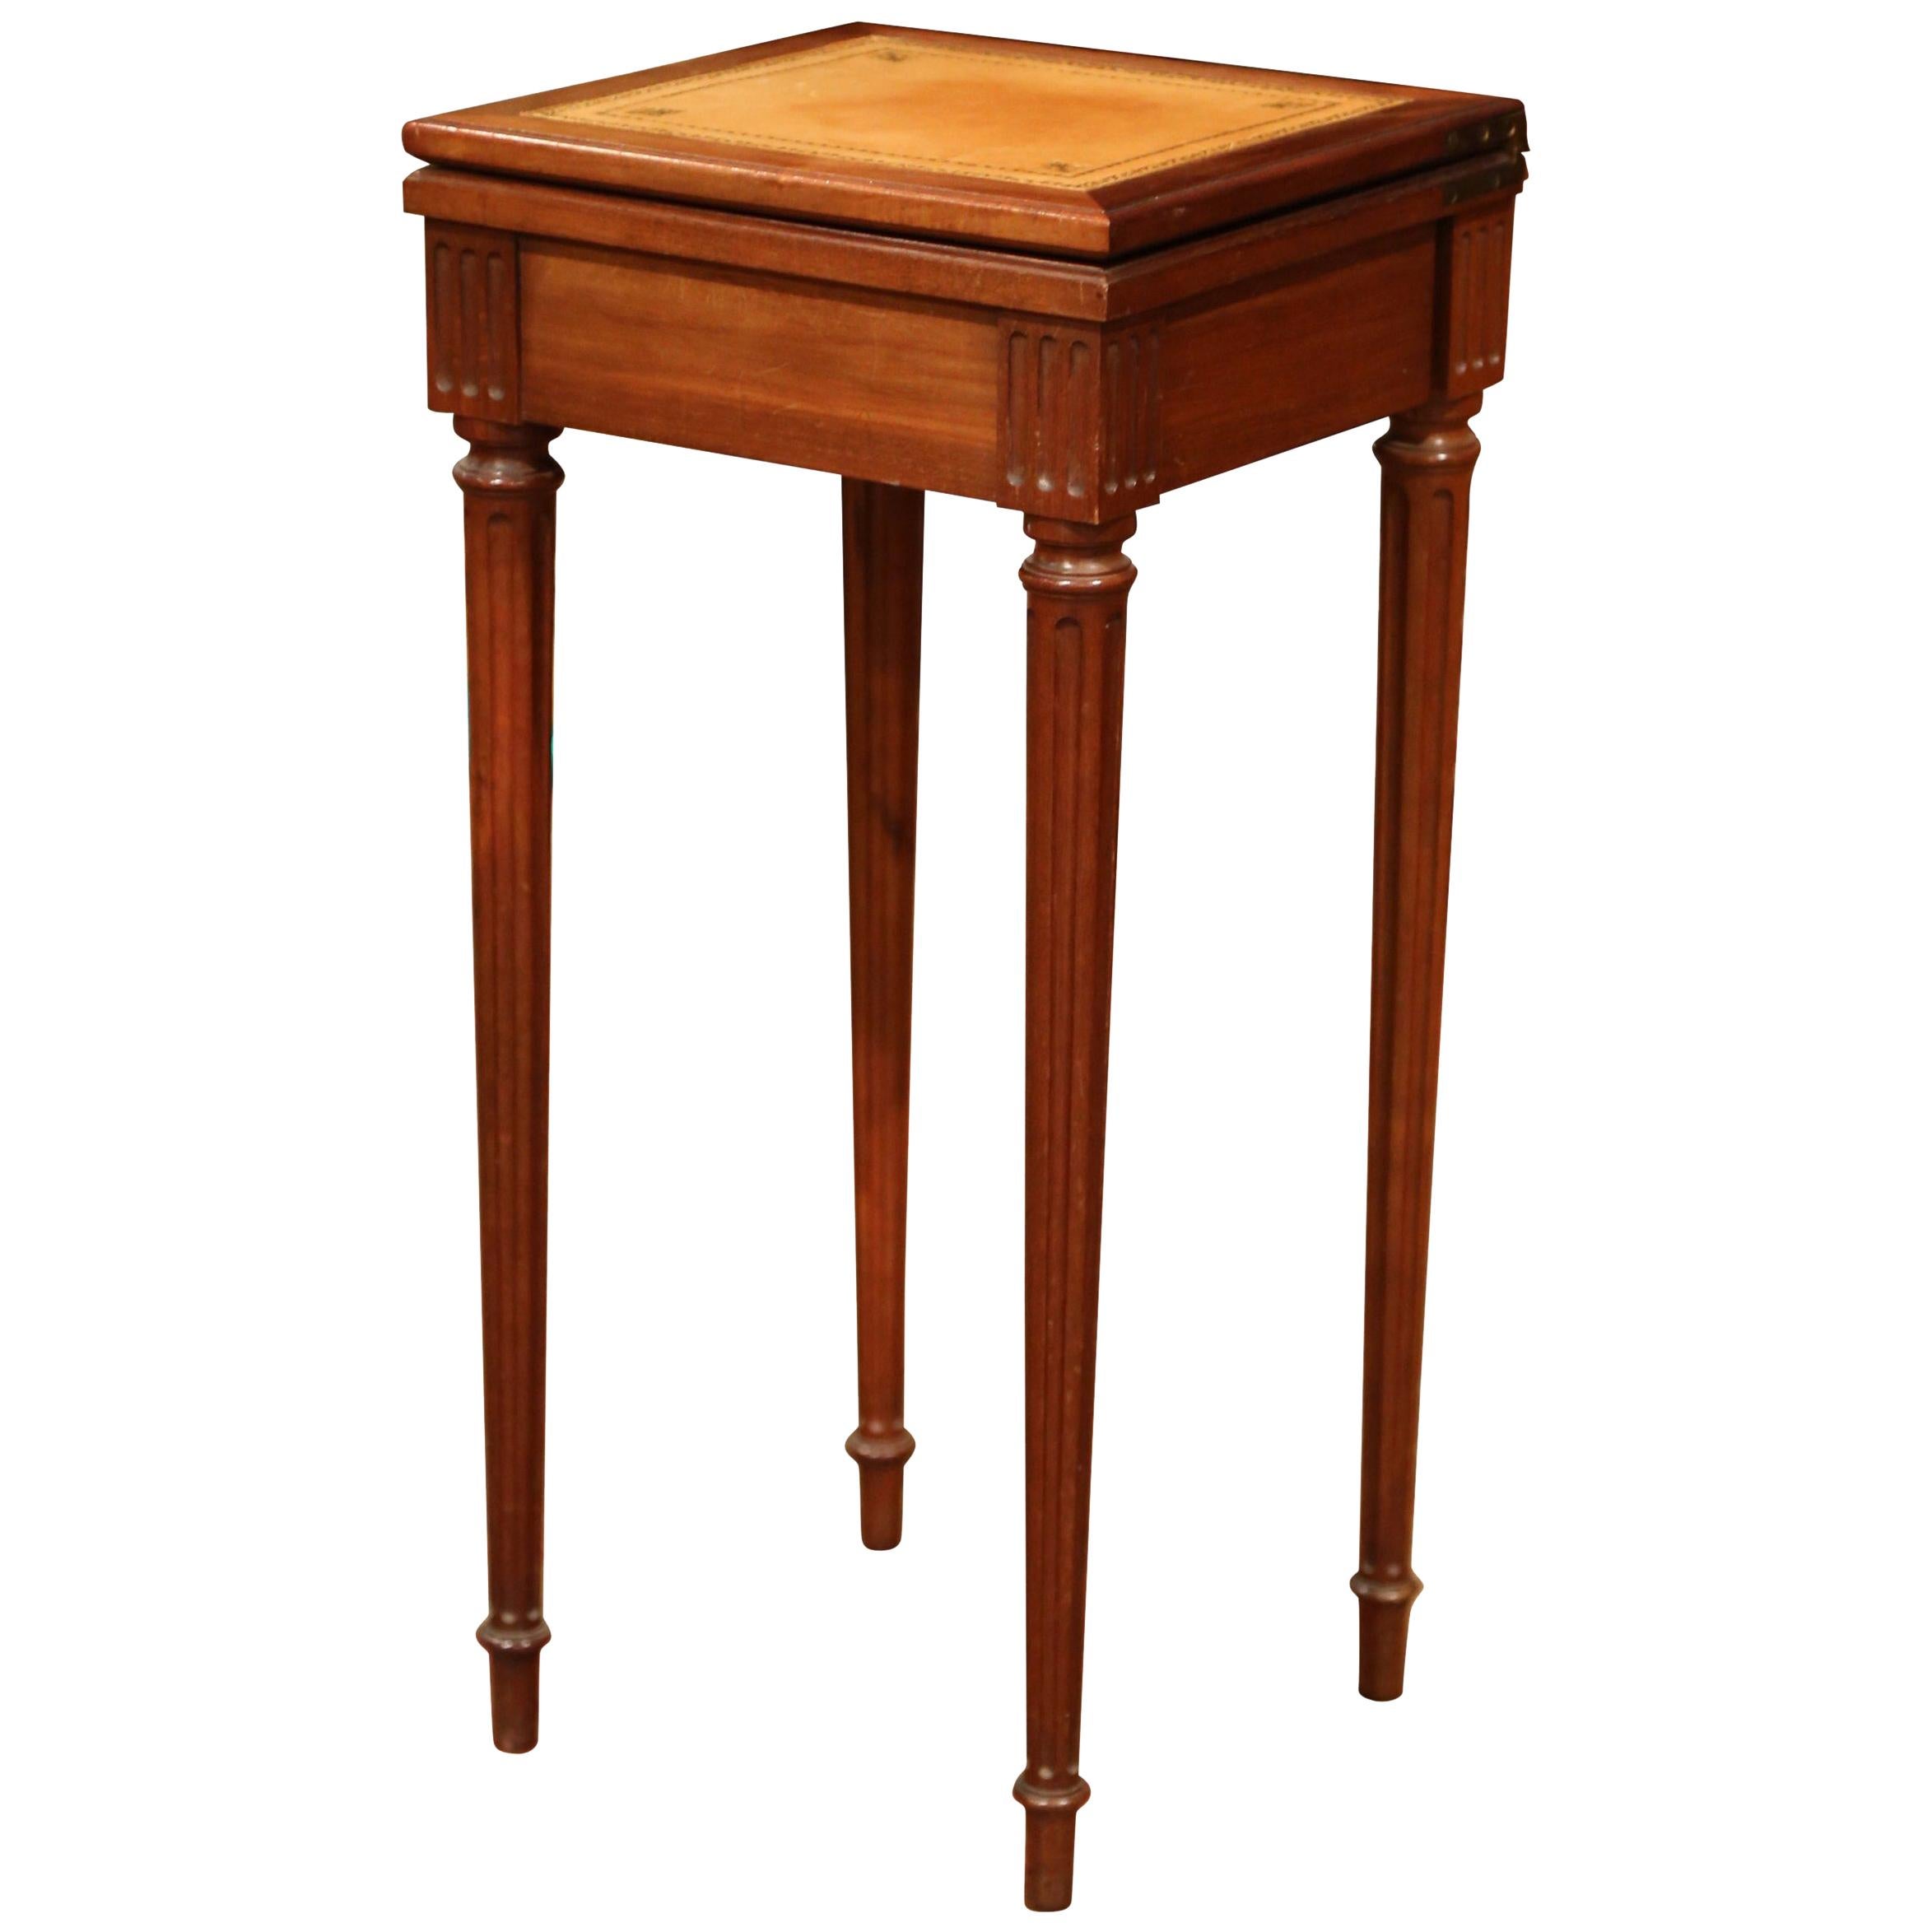 French Louis XVI Carved Walnut Folding Top Game Table with Tan Leather Surface